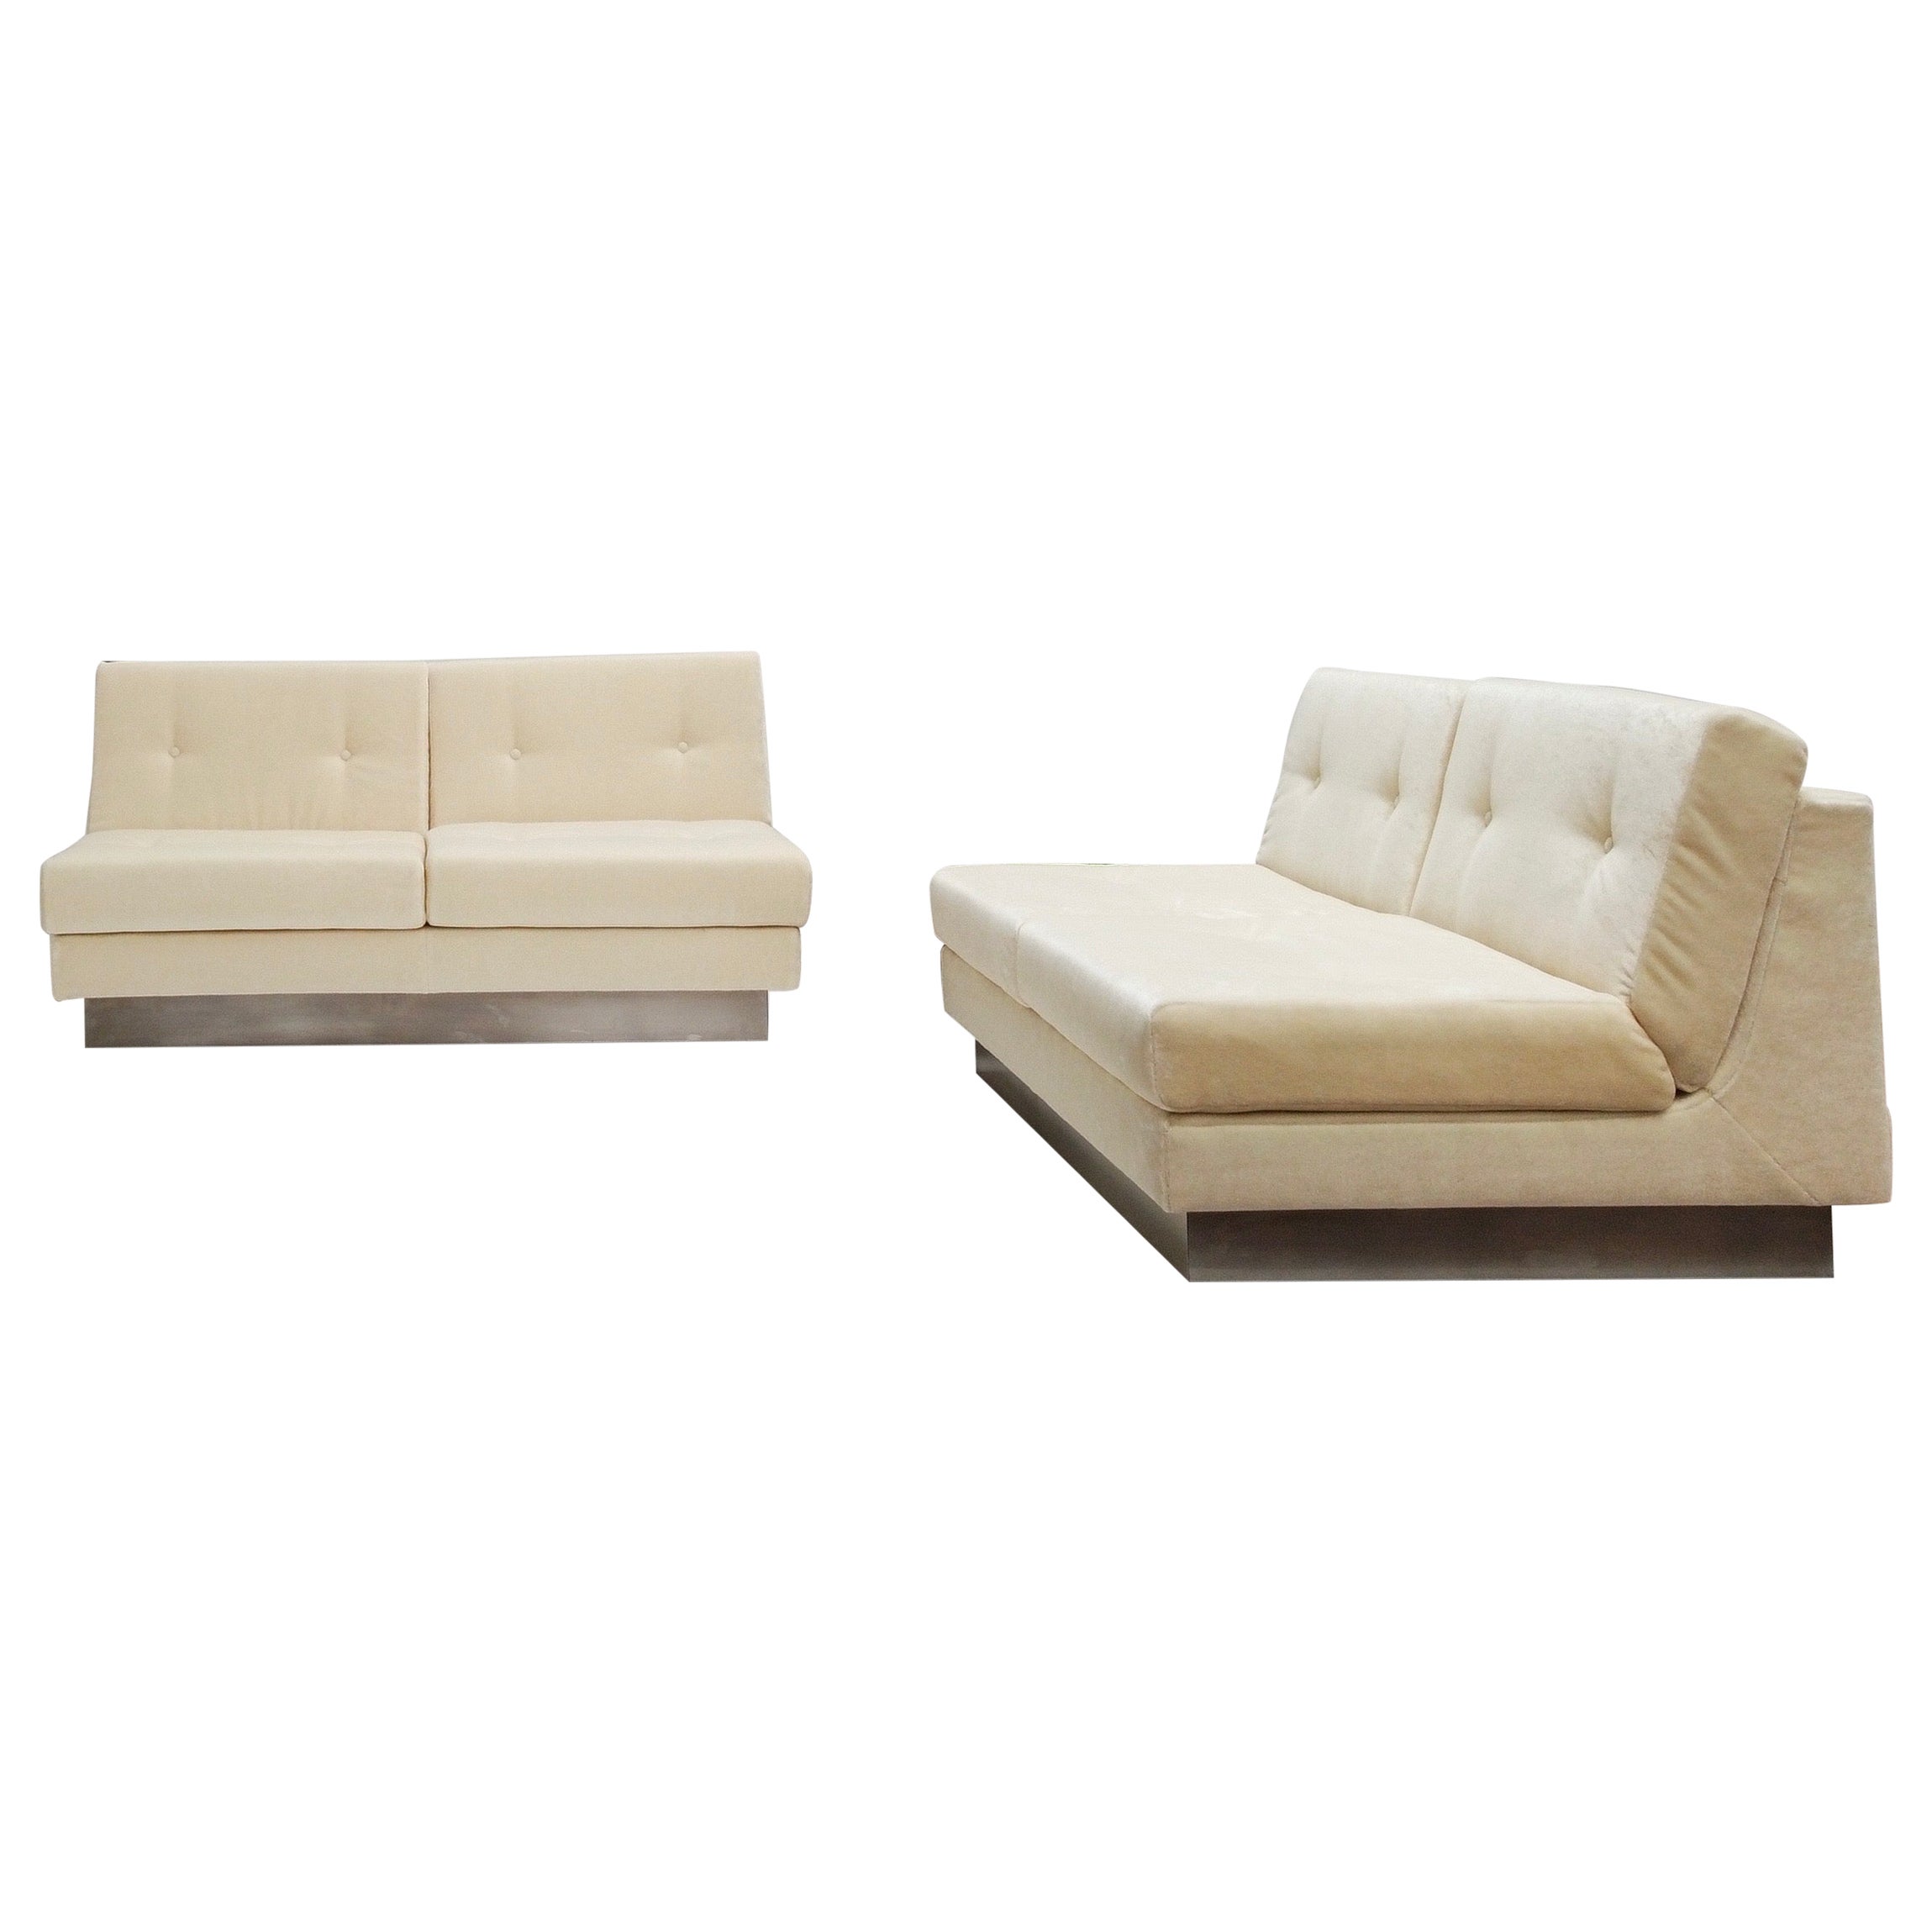 Pair of Two Seat Mohair 'California' Sofas, Jacques Charpentier, Paris, 1970 For Sale